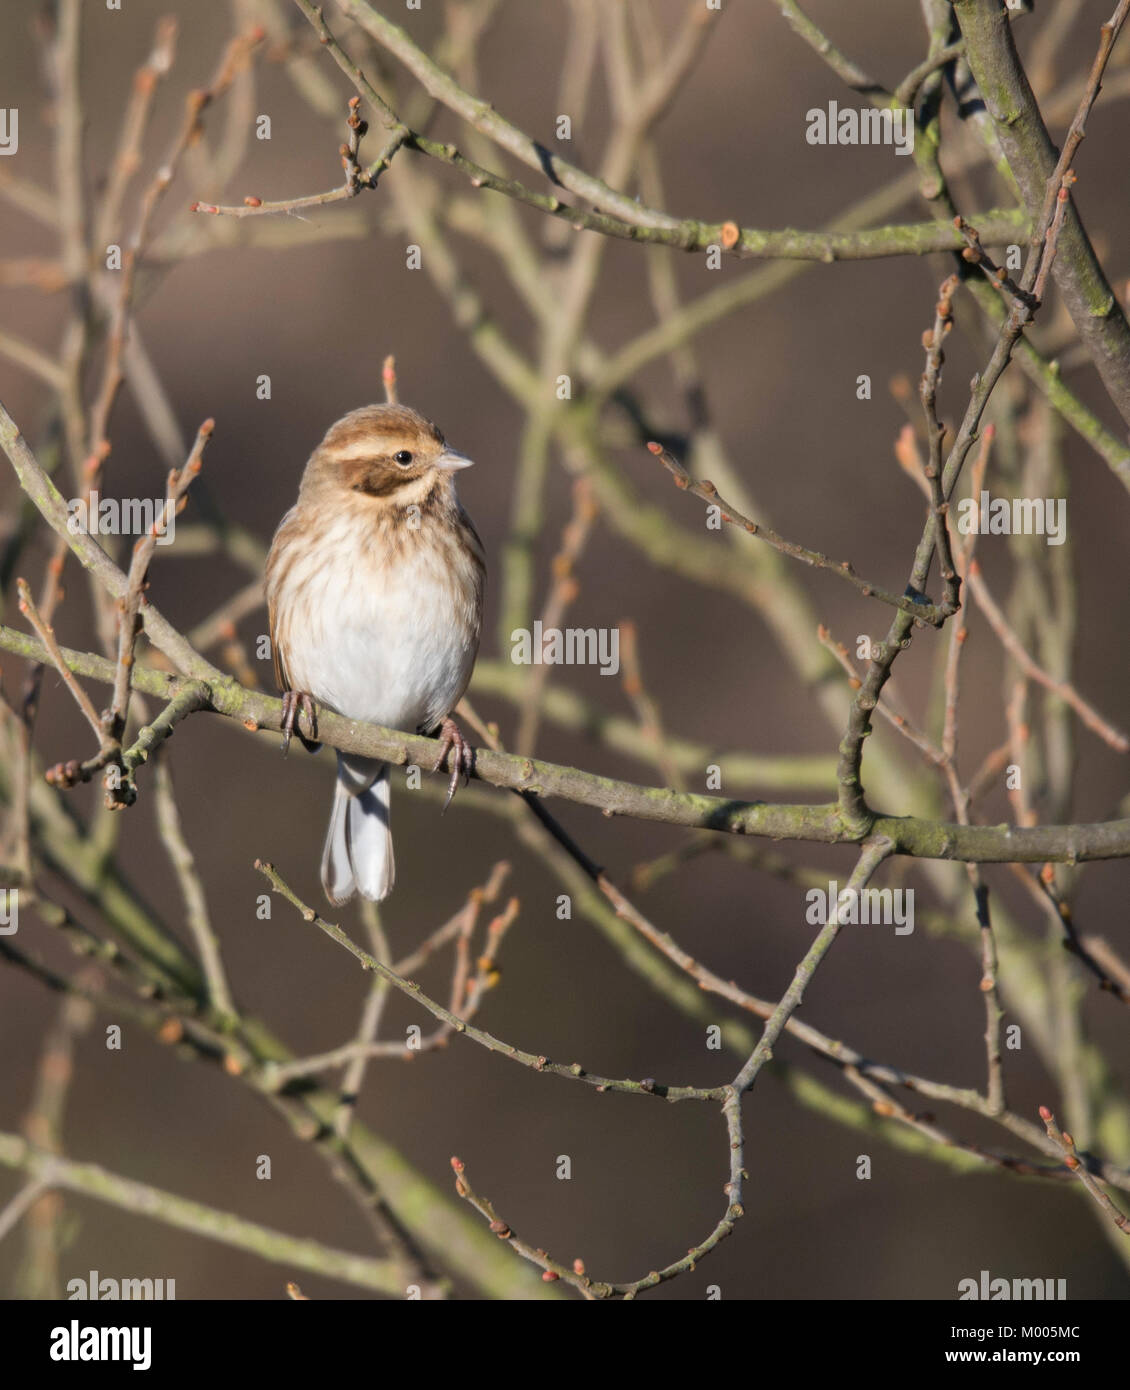 Female common reed bunting (Emberiza schoeniclus), perched in tree at Staveley Nature Reserve, United Kingdom. Stock Photo